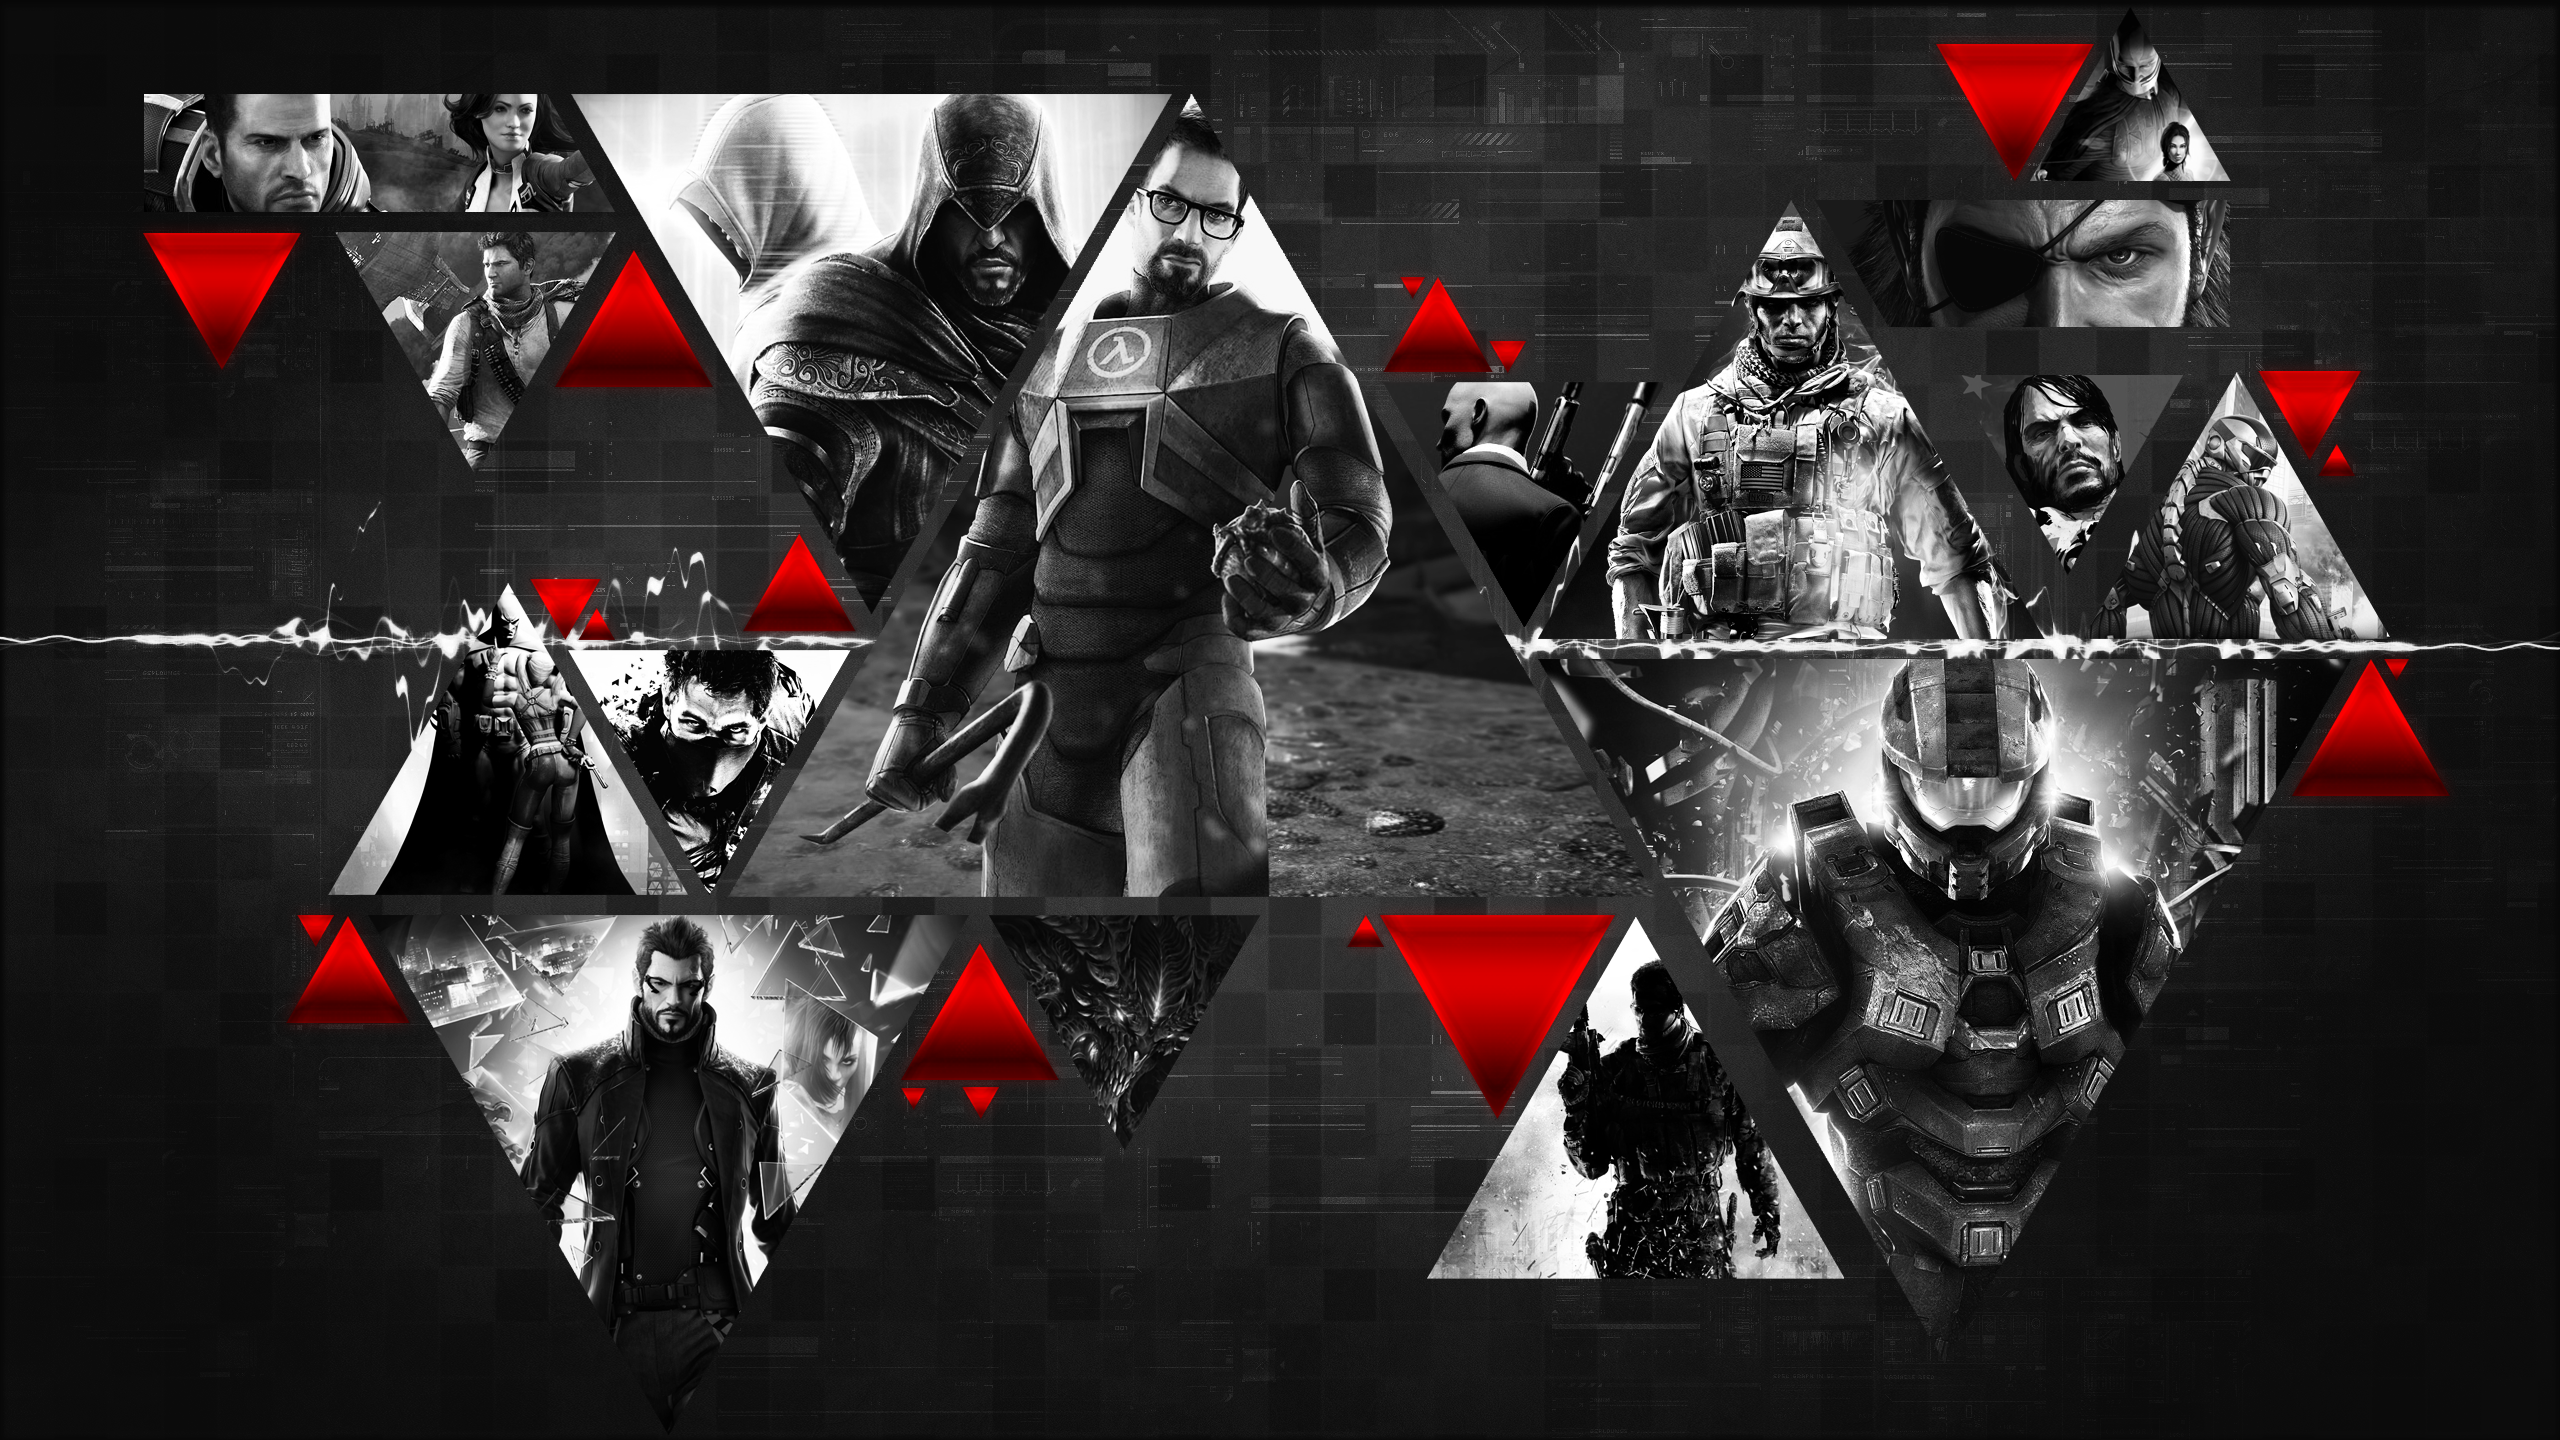 General 2560x1440 Batman: Arkham City Half-Life Assassin's Creed: Revelations Halo (game) Red Dead Redemption Hitman Call of Duty Metal Gear Solid Crysis video games Deus Ex: Human Revolution Star Wars Diablo III Mass Effect 2 Assassin's Creed artwork collage Batman: Arkham Asylum Mass Effect Crysis 3 Metal Gear Solid: Peace Walker Uncharted 3: Drake's Deception Battlefield 3 video game art Master Chief (Halo)